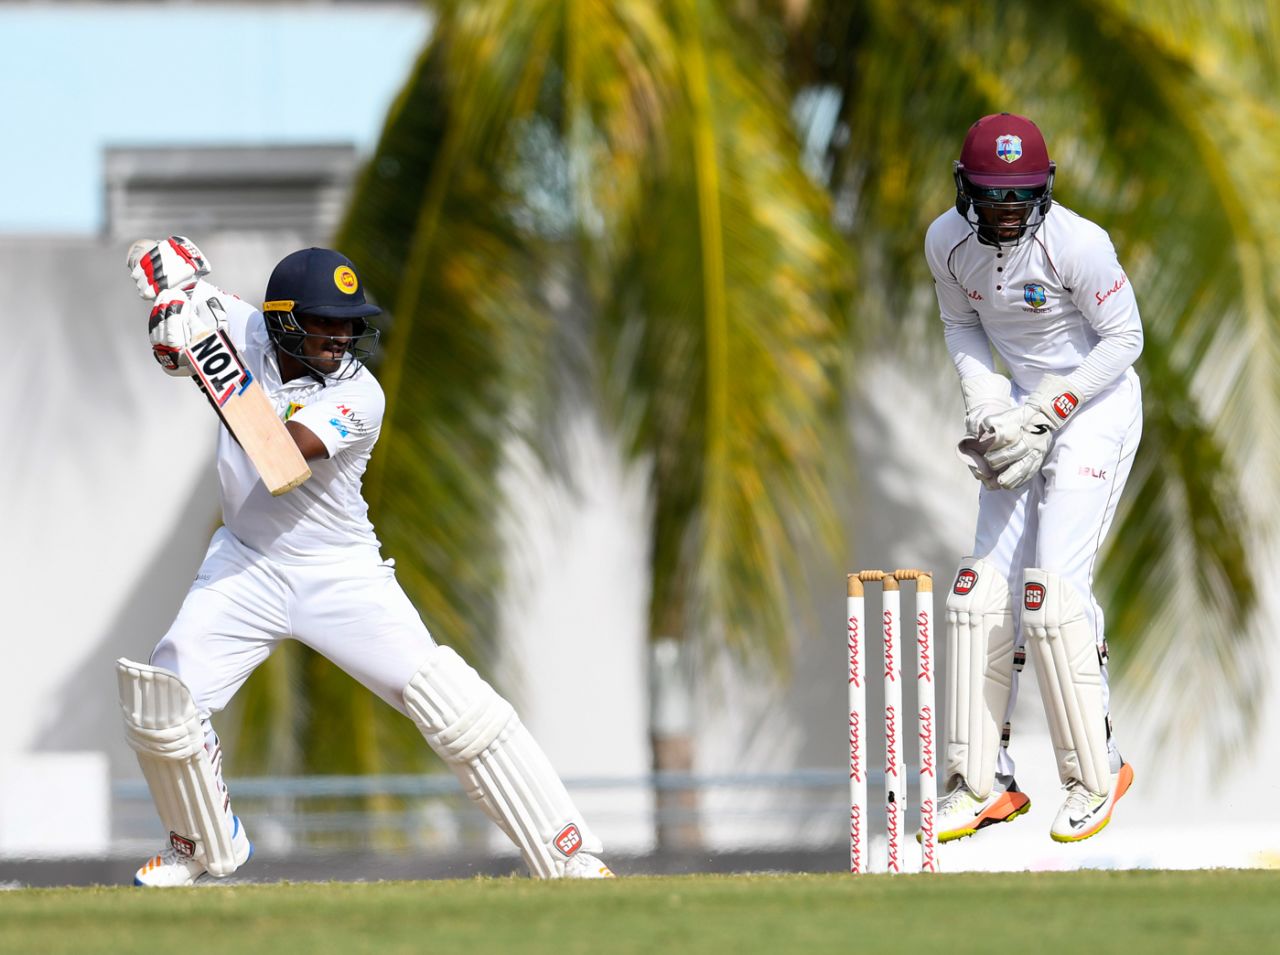 Kusal Perera guides the ball square on the off side, West Indies v Sri Lanka, 3rd Test, Barbados, 5th day, June 26, 2018